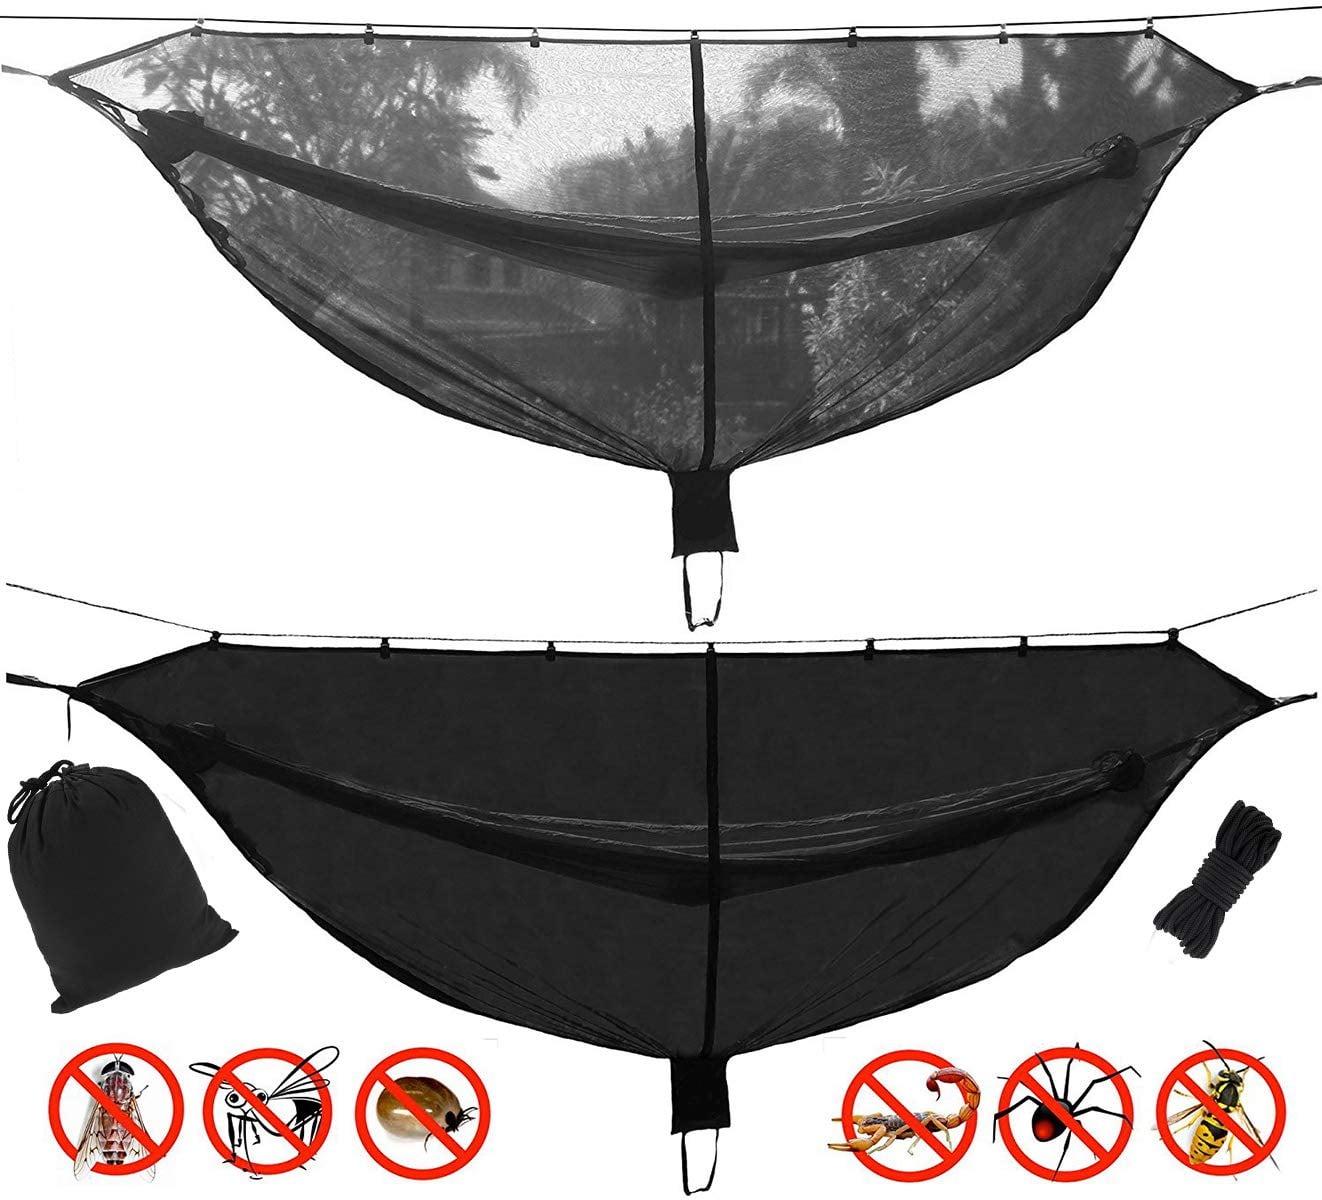 LOLO TOUR Ultralight Hammock Bug Mosquito Free Net for Outdoor Survival Anti-Mosquito Nets 133×55inch Fit All Hammock Portable Camping Gear 